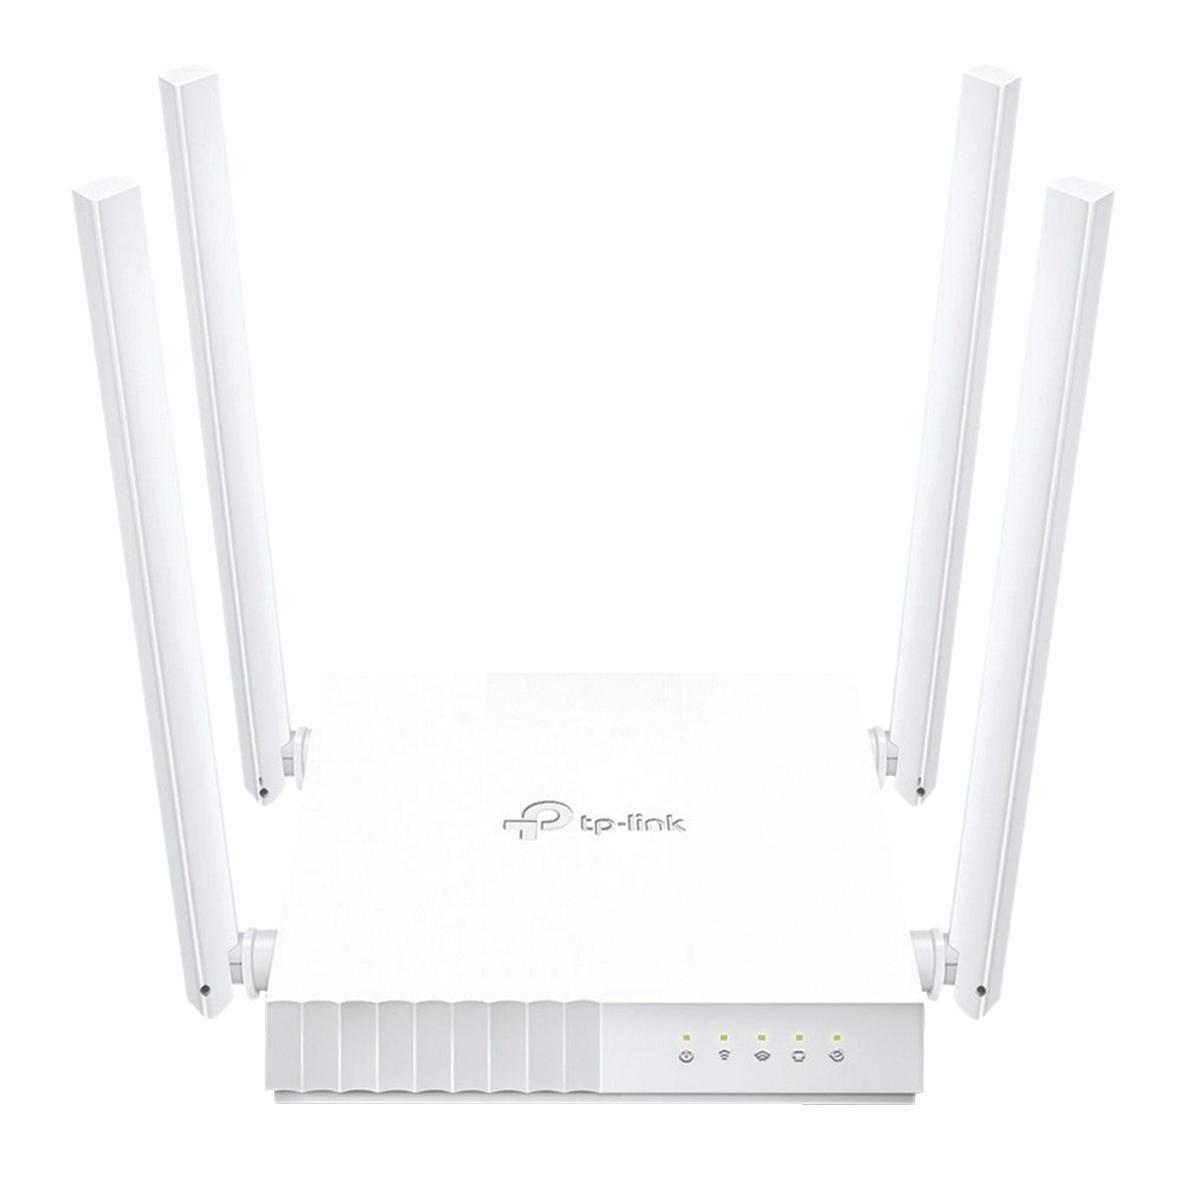 Rotead WiFi 750Mbps C21 Archer TP-Link